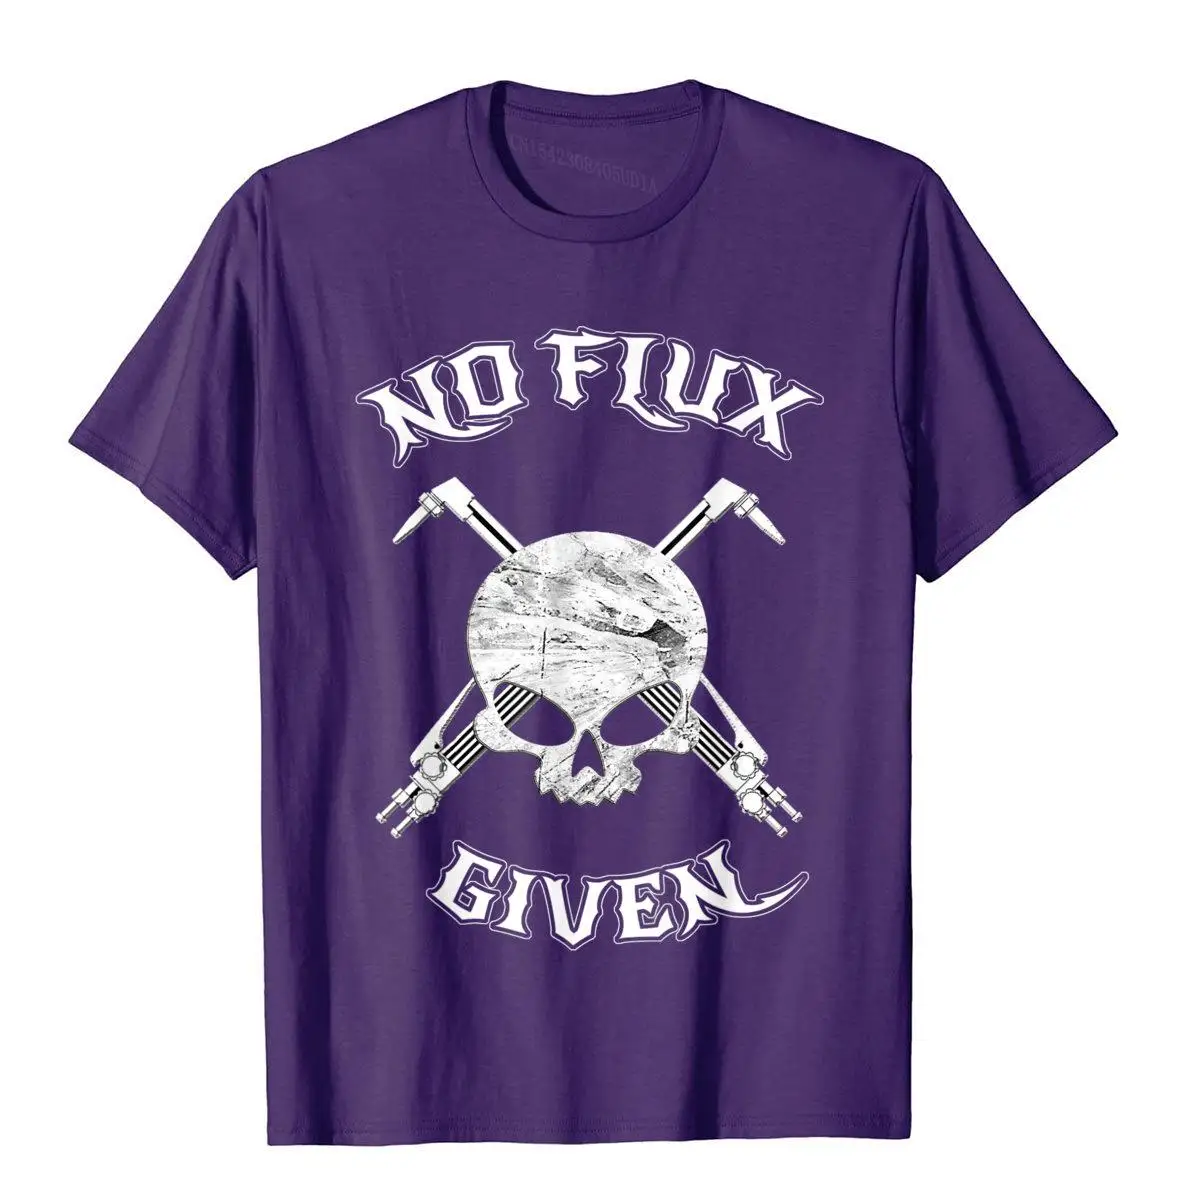 No Flux Given - Funny Welder Tee Shirt For Welding Dads__B6994purple